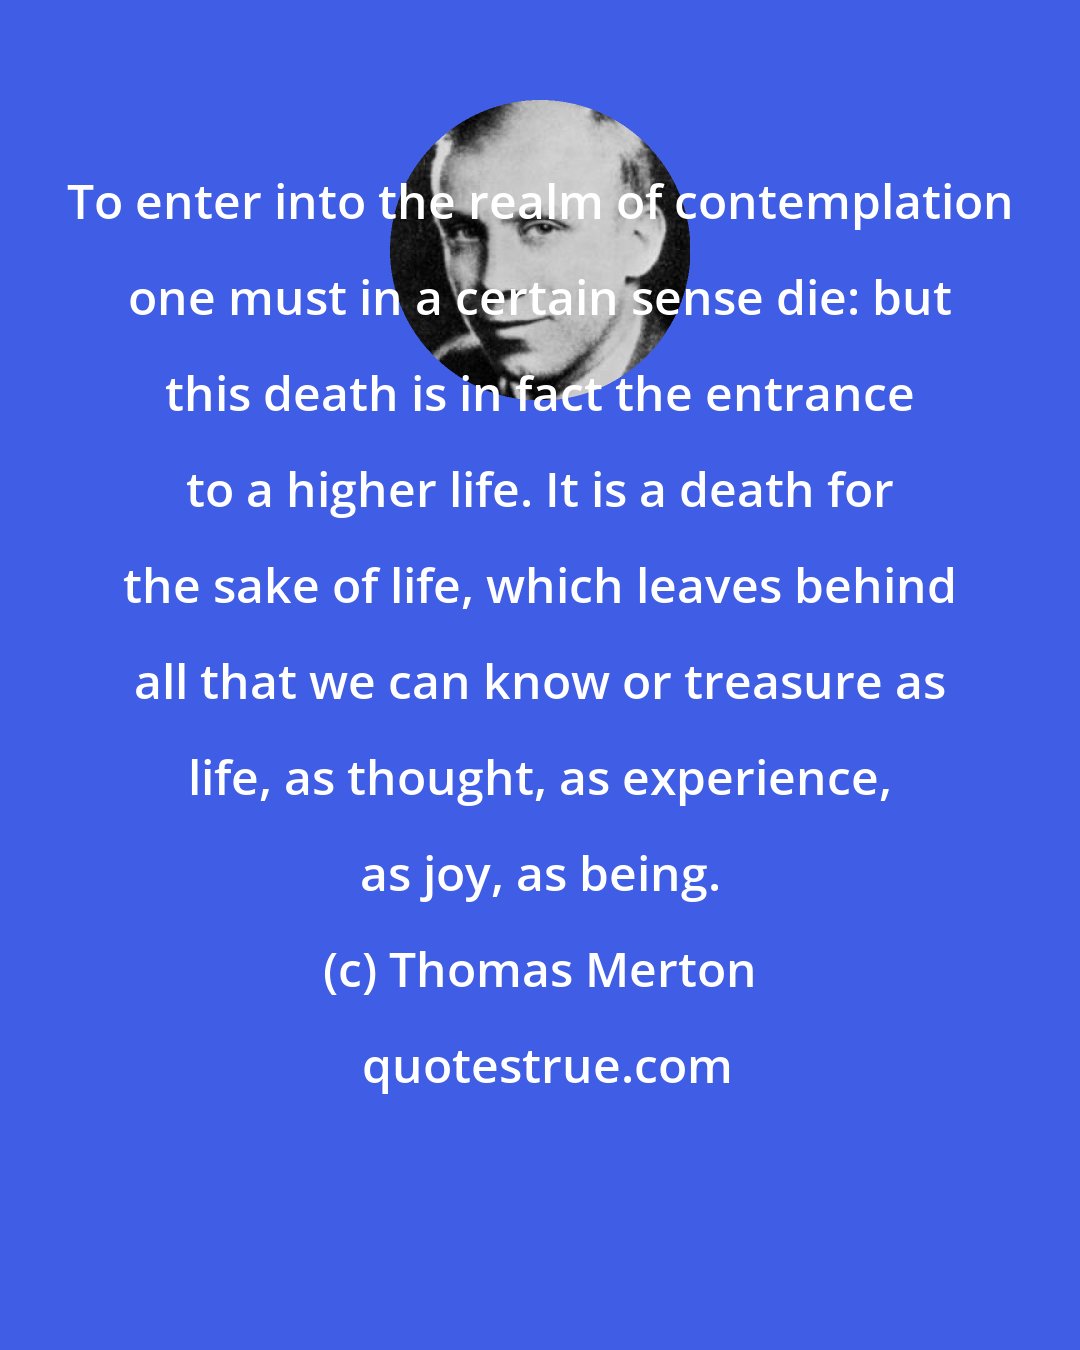 Thomas Merton: To enter into the realm of contemplation one must in a certain sense die: but this death is in fact the entrance to a higher life. It is a death for the sake of life, which leaves behind all that we can know or treasure as life, as thought, as experience, as joy, as being.